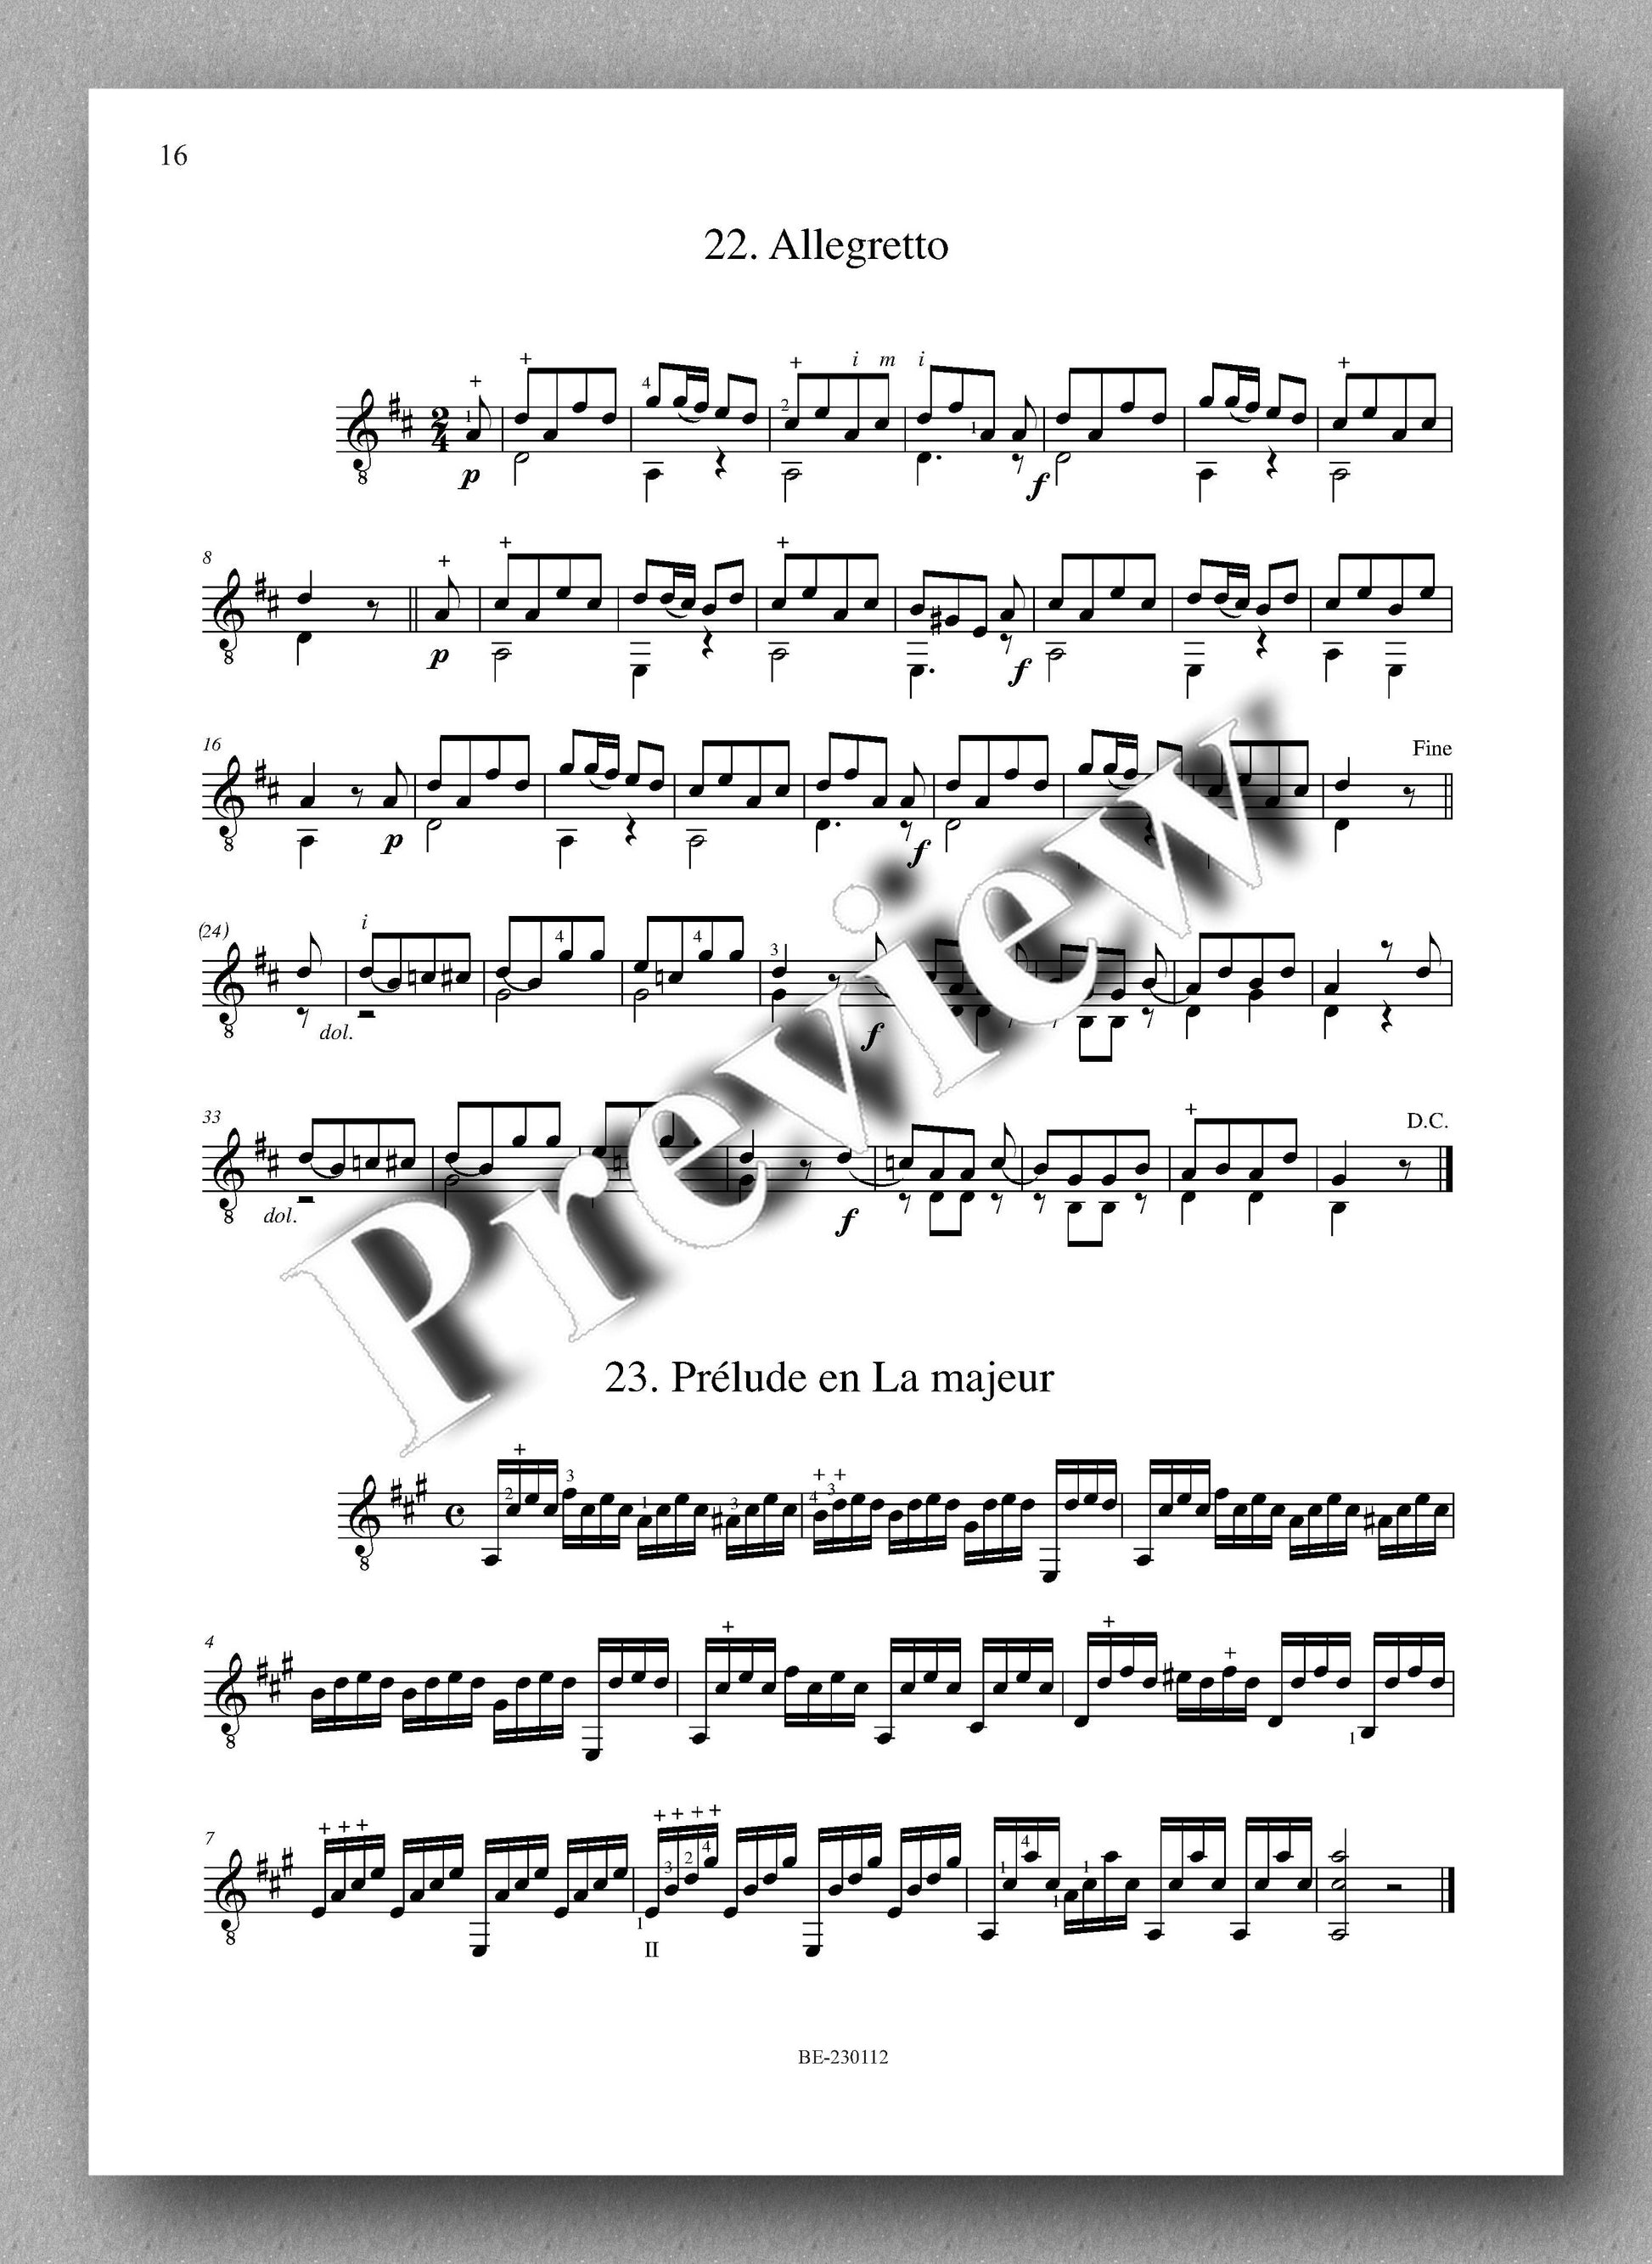 Molino, Collected Works for Guitar Solo, Vol. 24 - preview of the music score 2